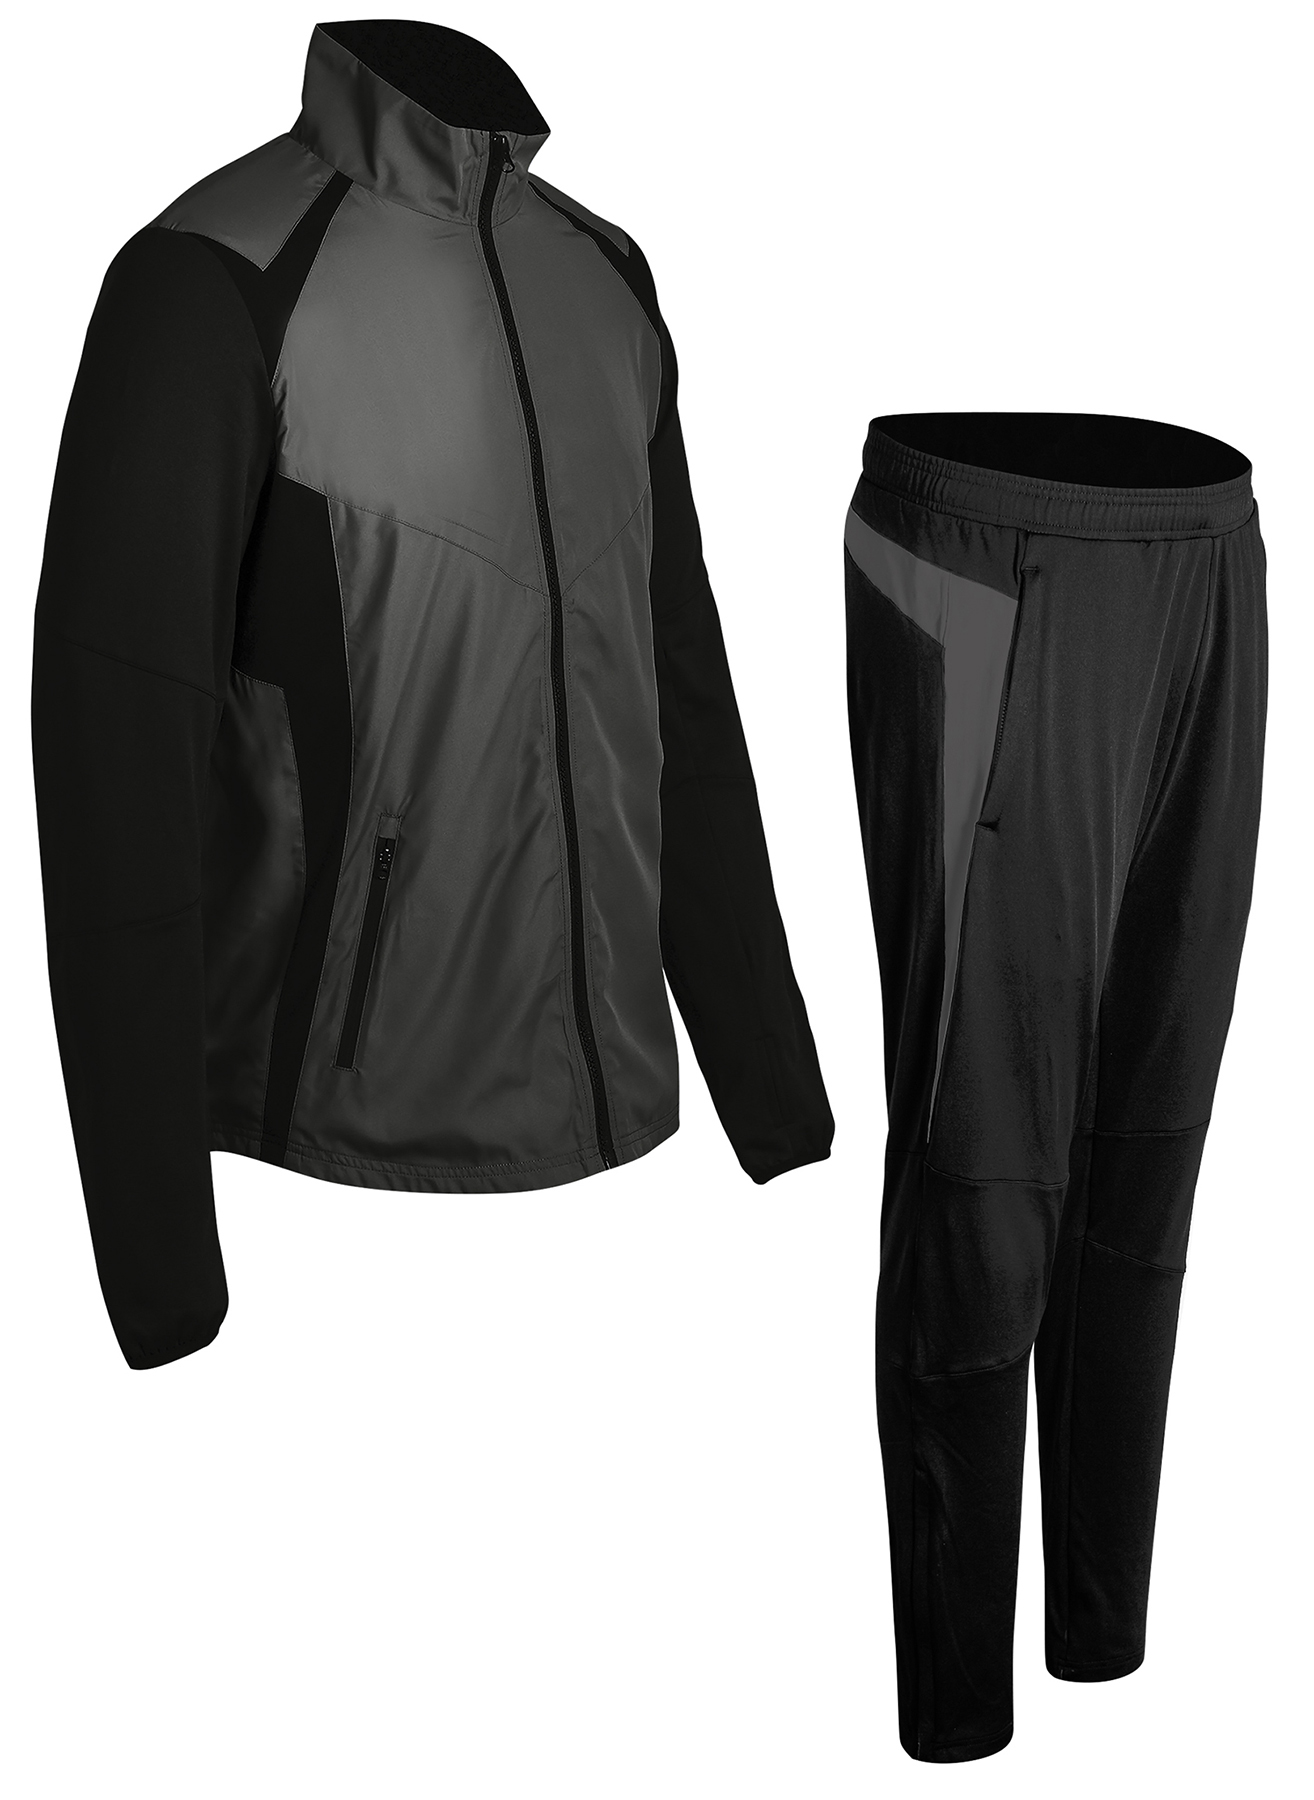 E205651 AXI0 Athletic Adult & Youth Full-Zip Performance Warm-Up Jacket ...